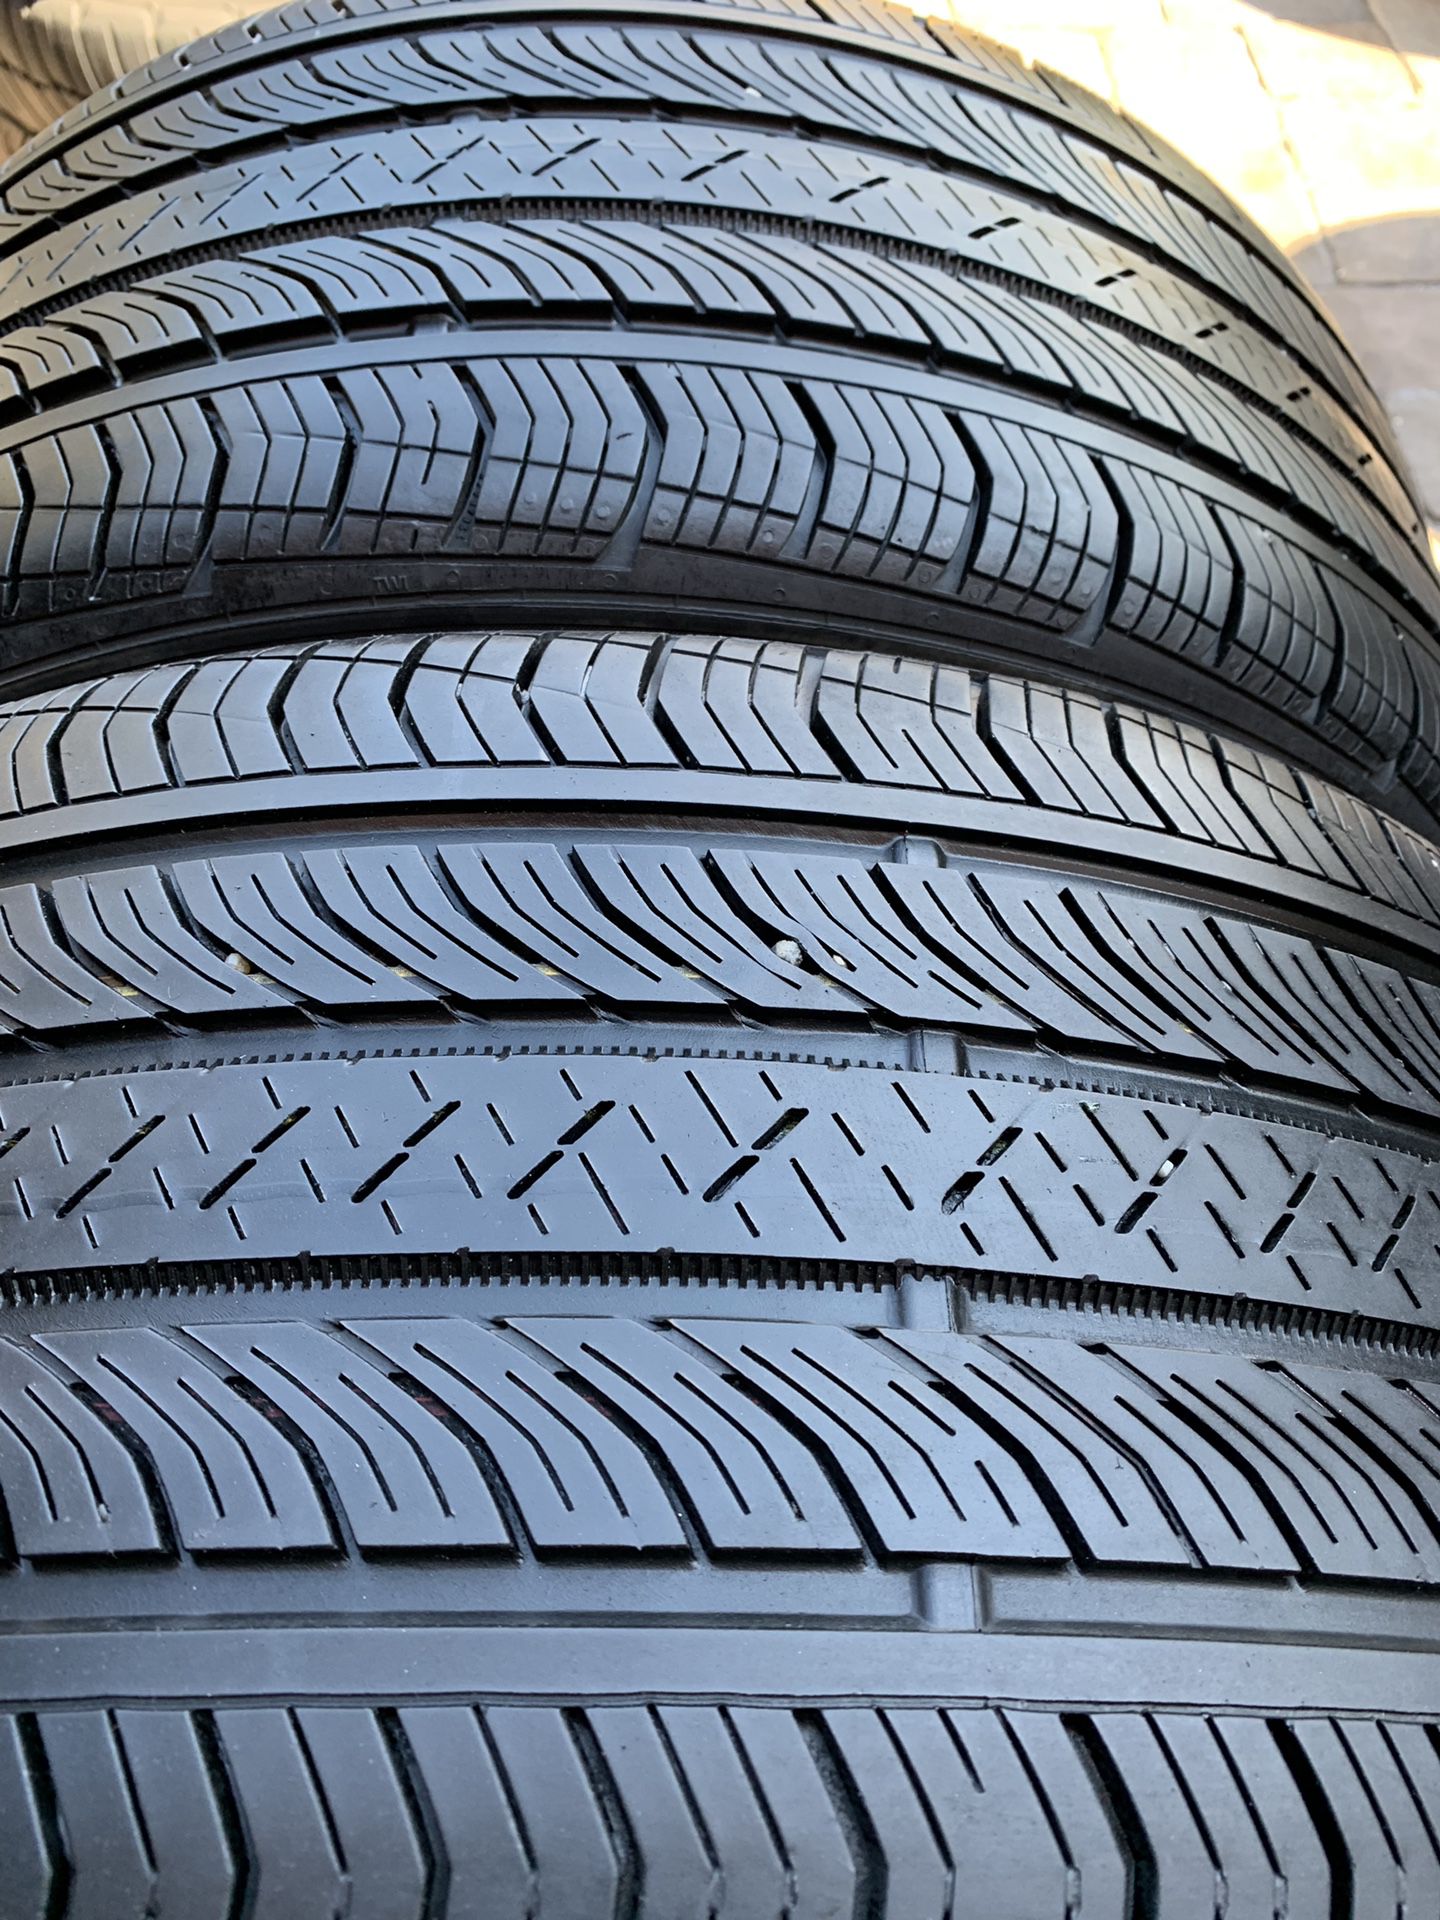 275 35 19 Continental pro contact 2 tires